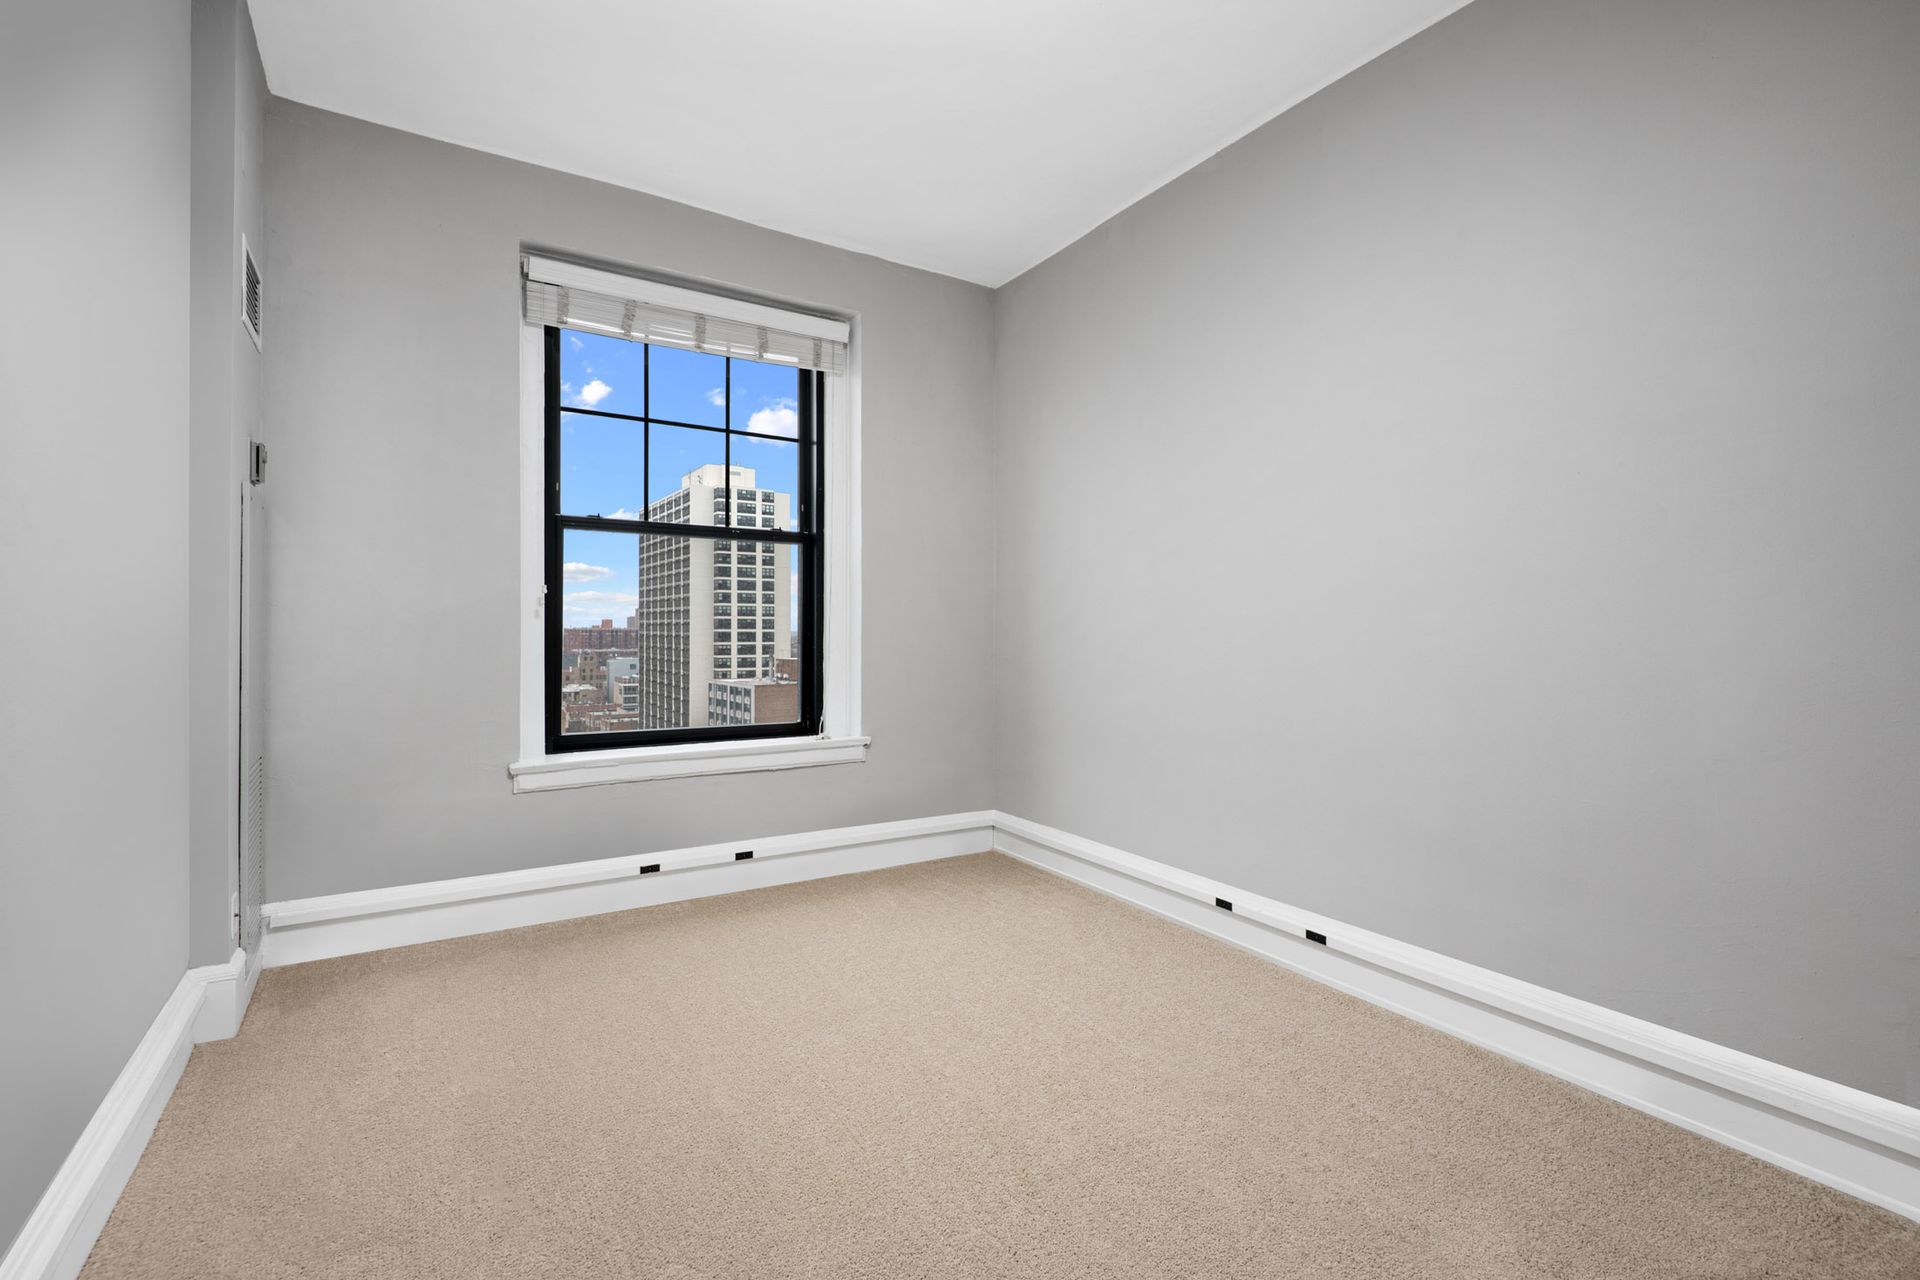 An empty room with a window and a carpeted floor at The Belmont by Reside.